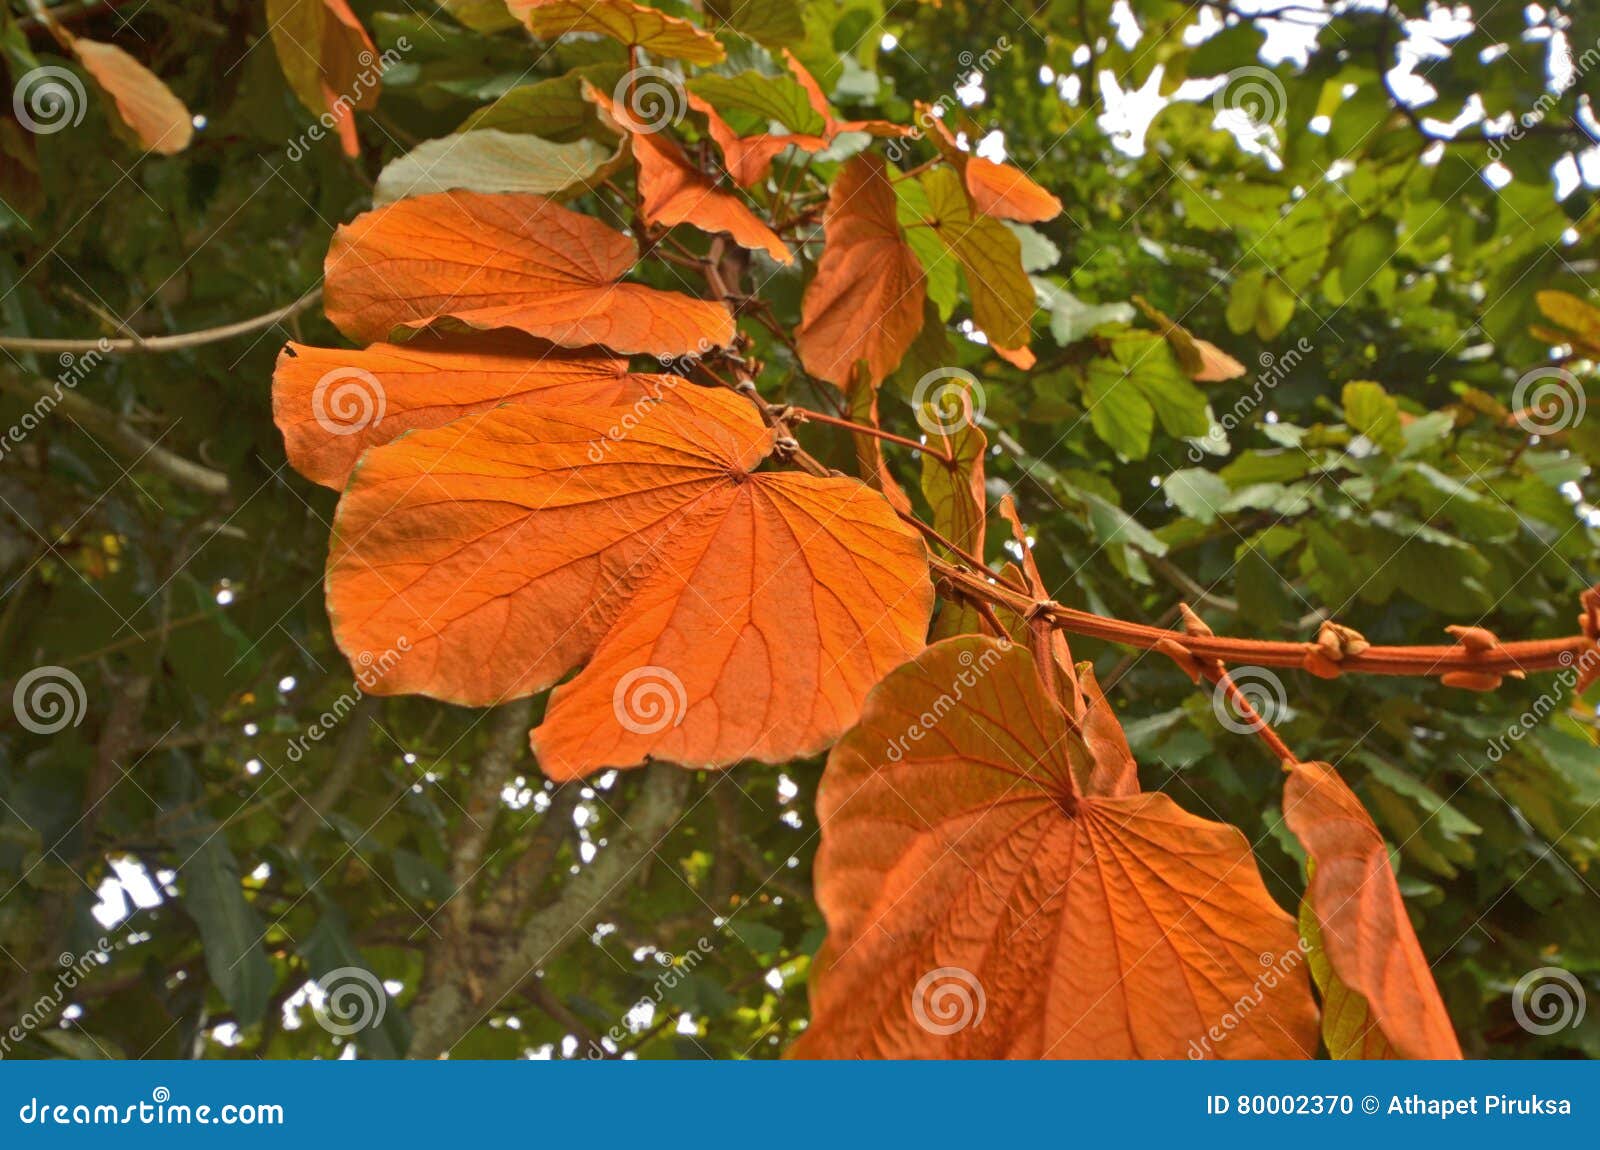 gaudy color of wild vine leaves on the tree